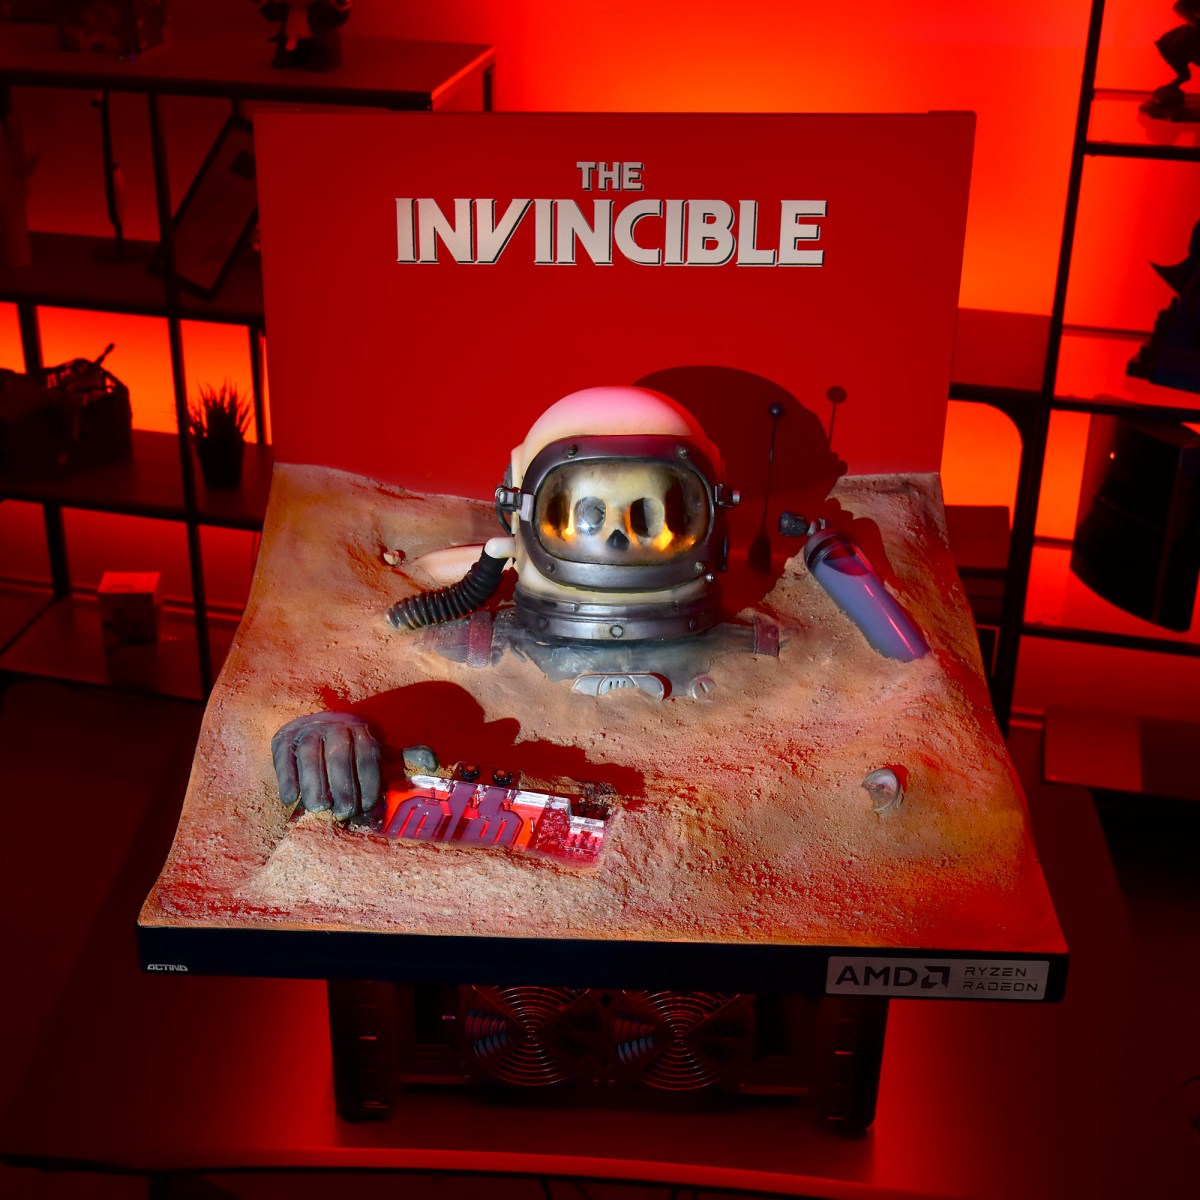 The Invincible Release Date Trailer Reveals November Launch